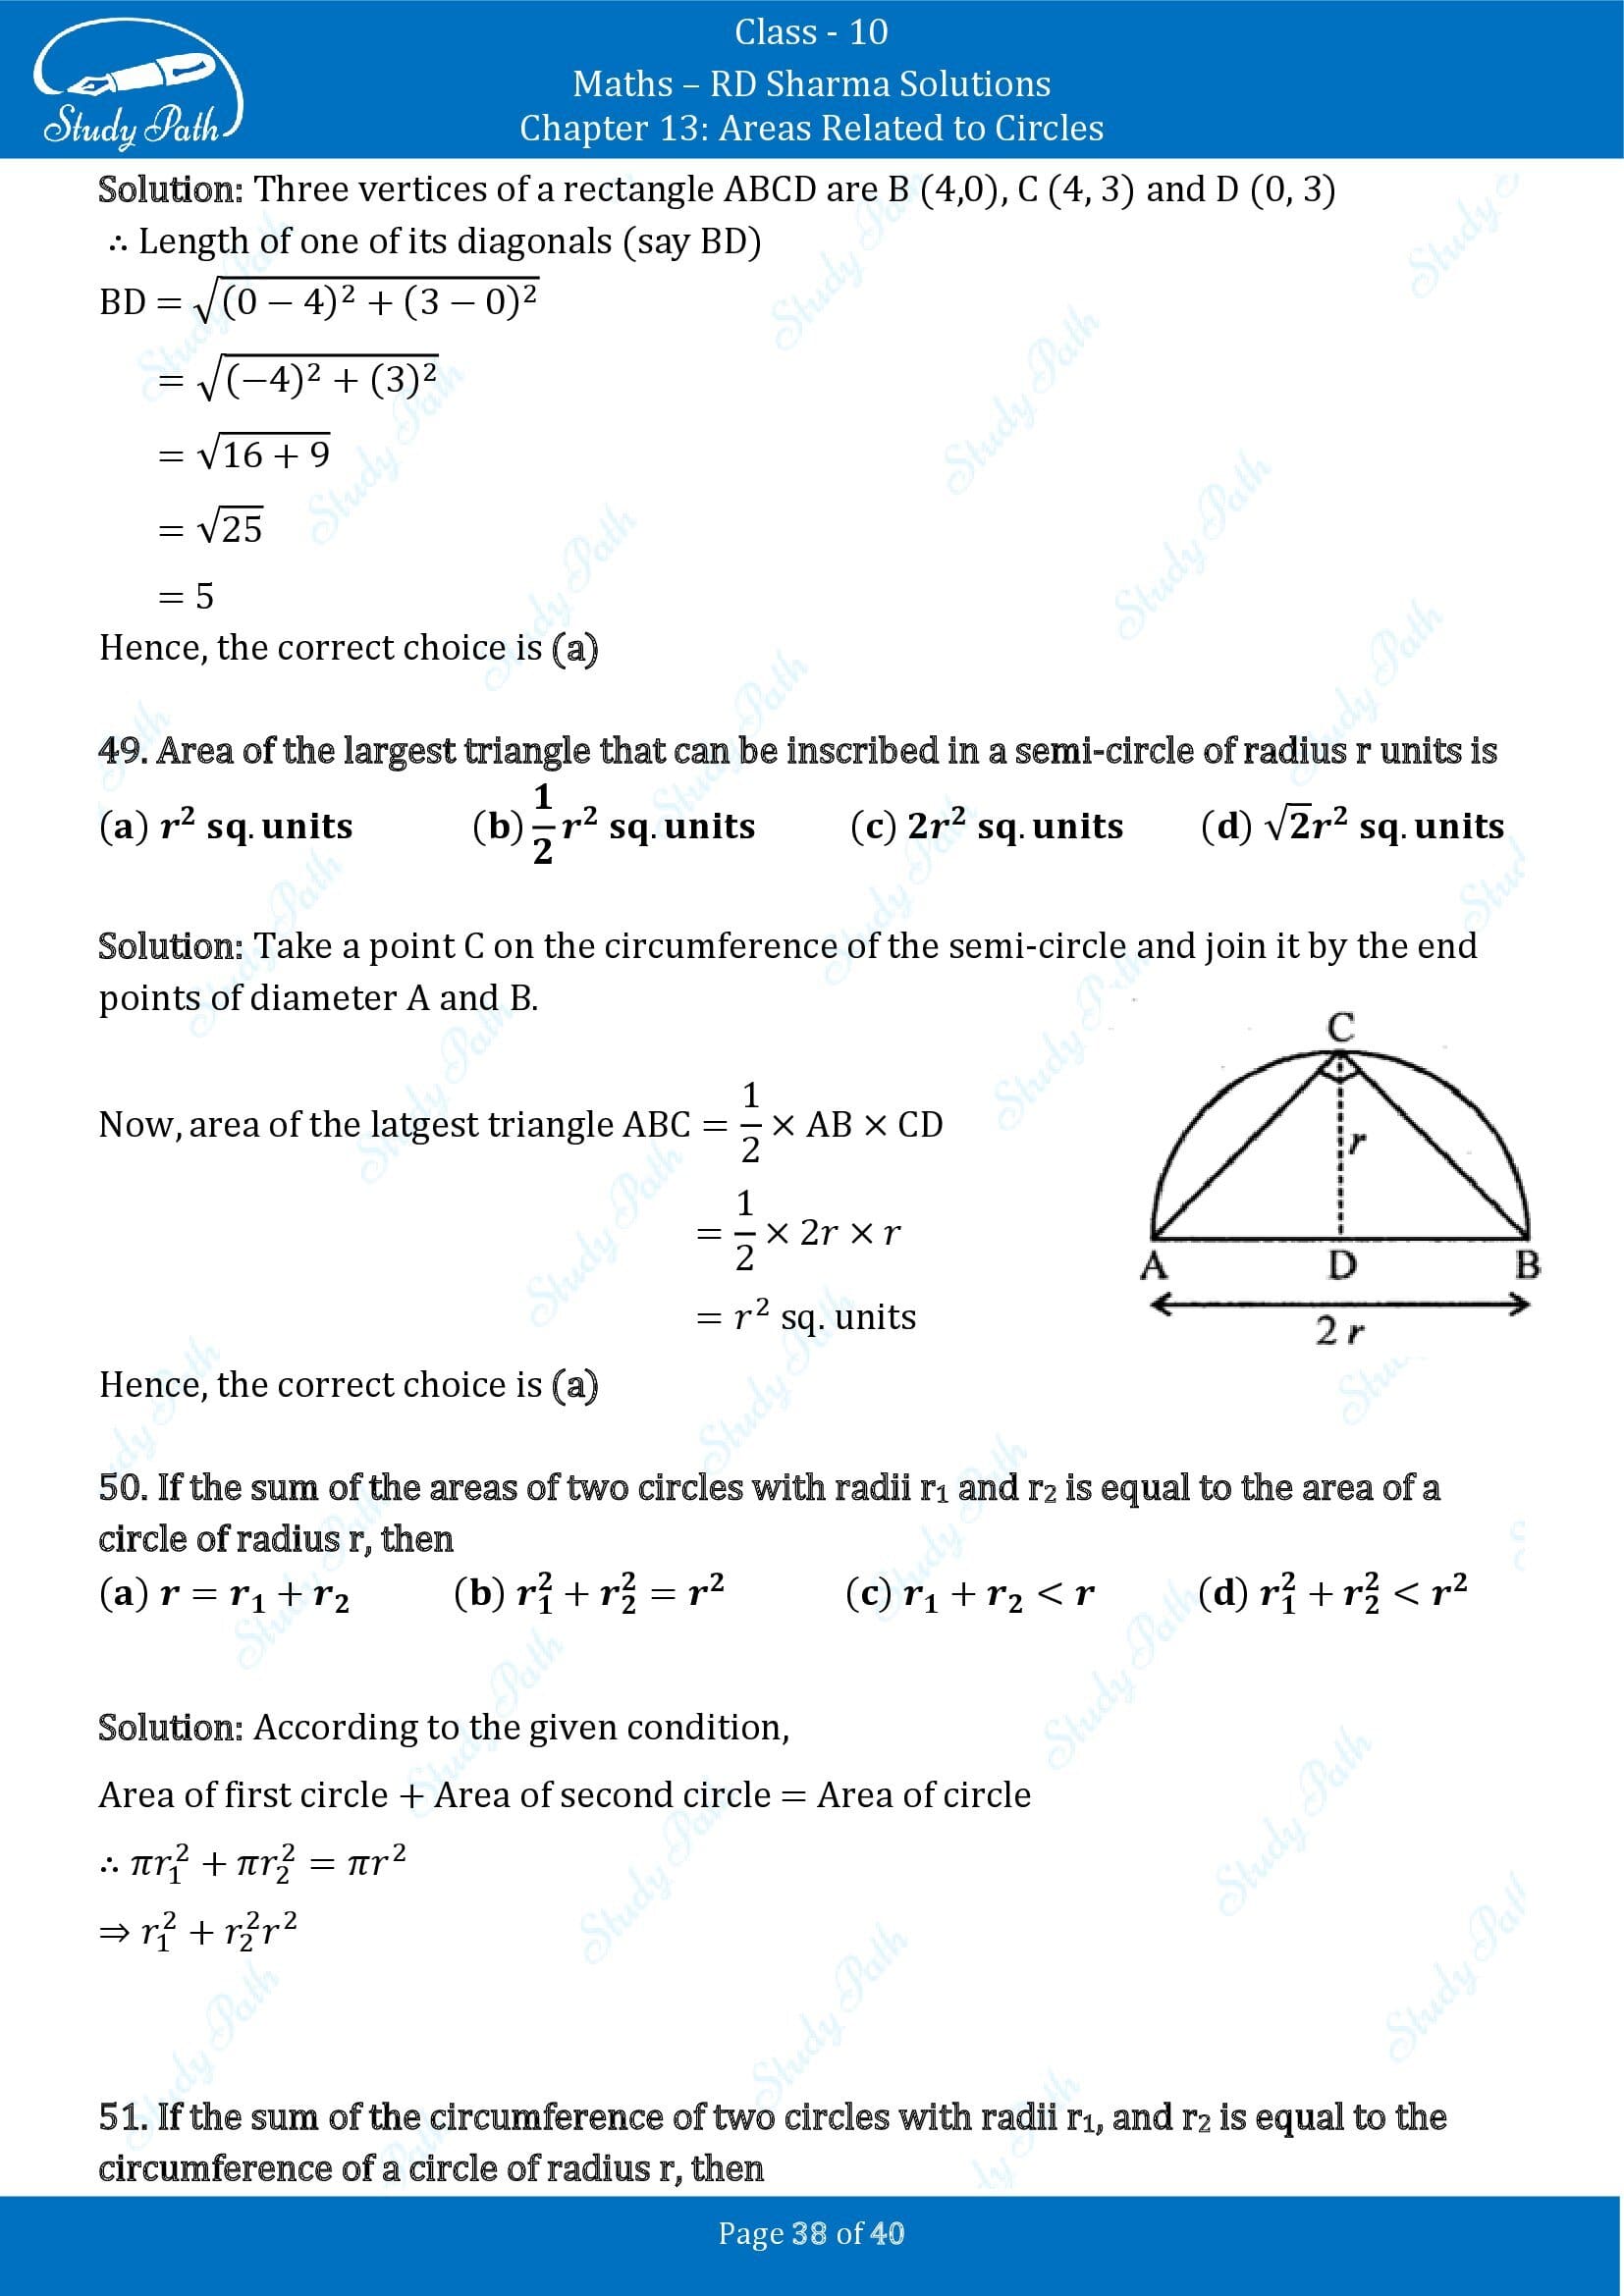 RD Sharma Solutions Class 10 Chapter 13 Areas Related to Circles Multiple Choice Question MCQs 00038